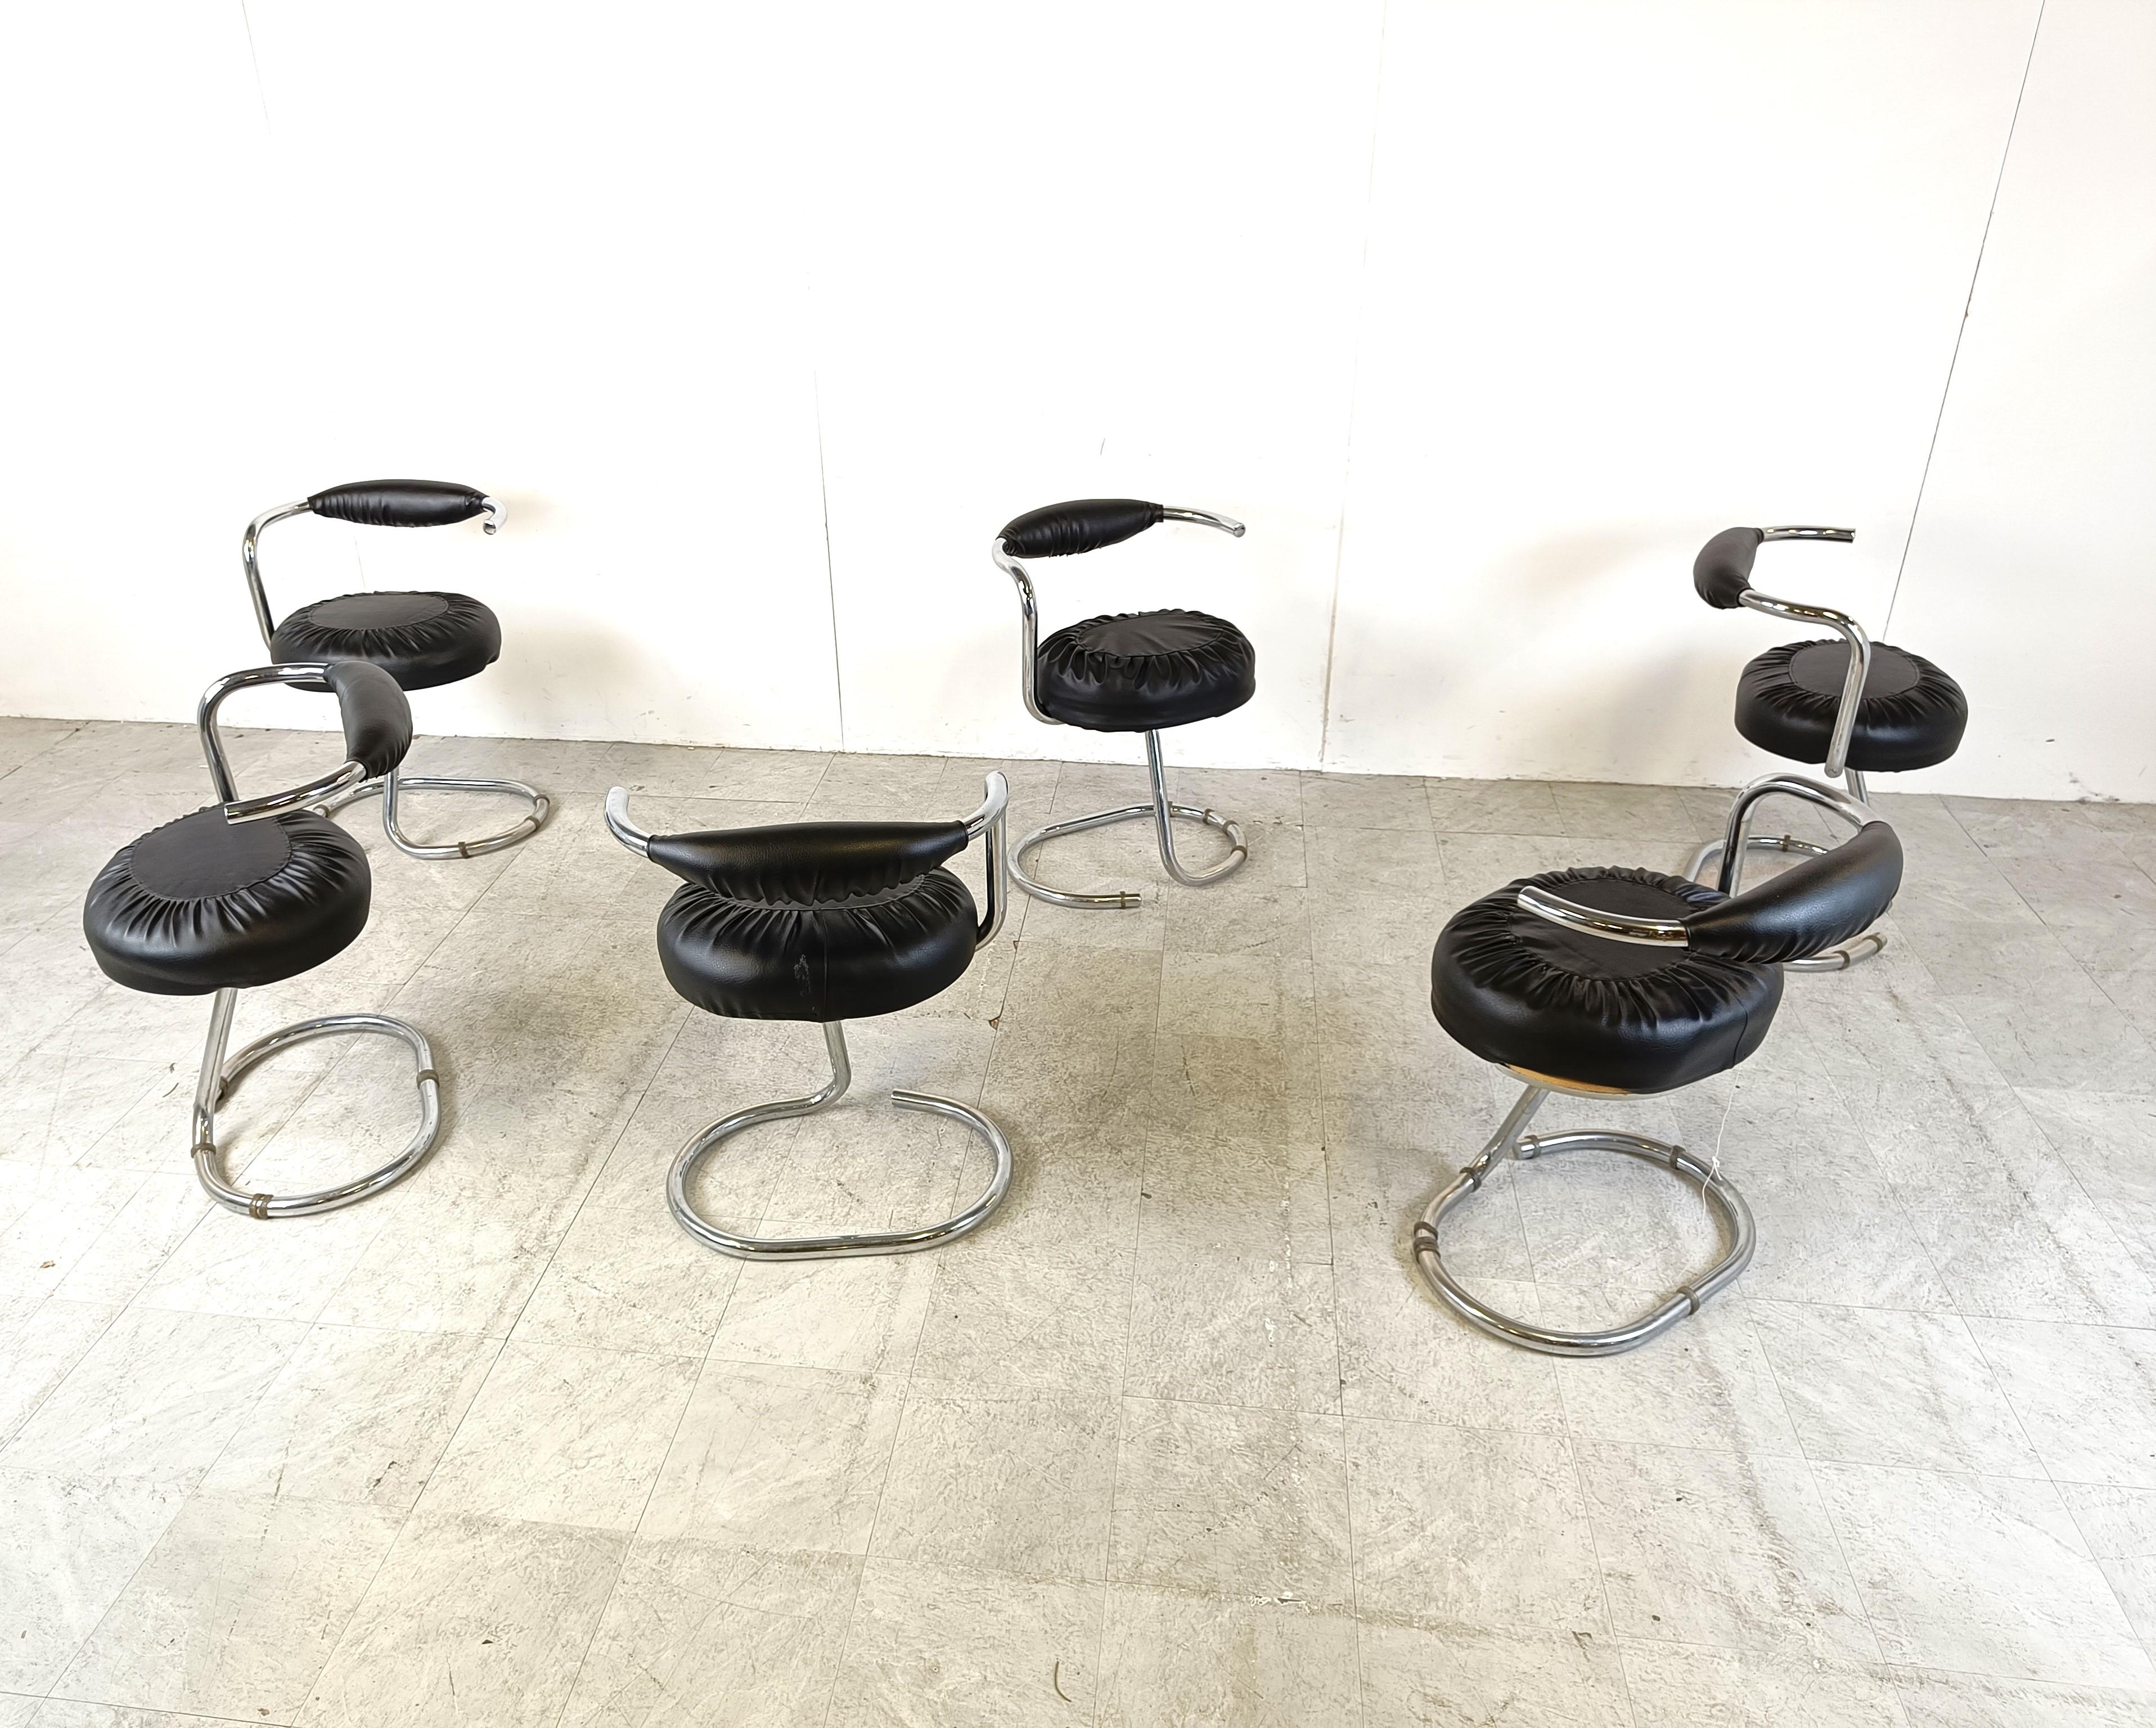 Set of 6 'cobra' chairs designed by Italian designer Giotto Stoppino.

Comes with a black leatherette upholstery.

Good condition

1970s - Italy

Measurements
Width	58 cm/22.8